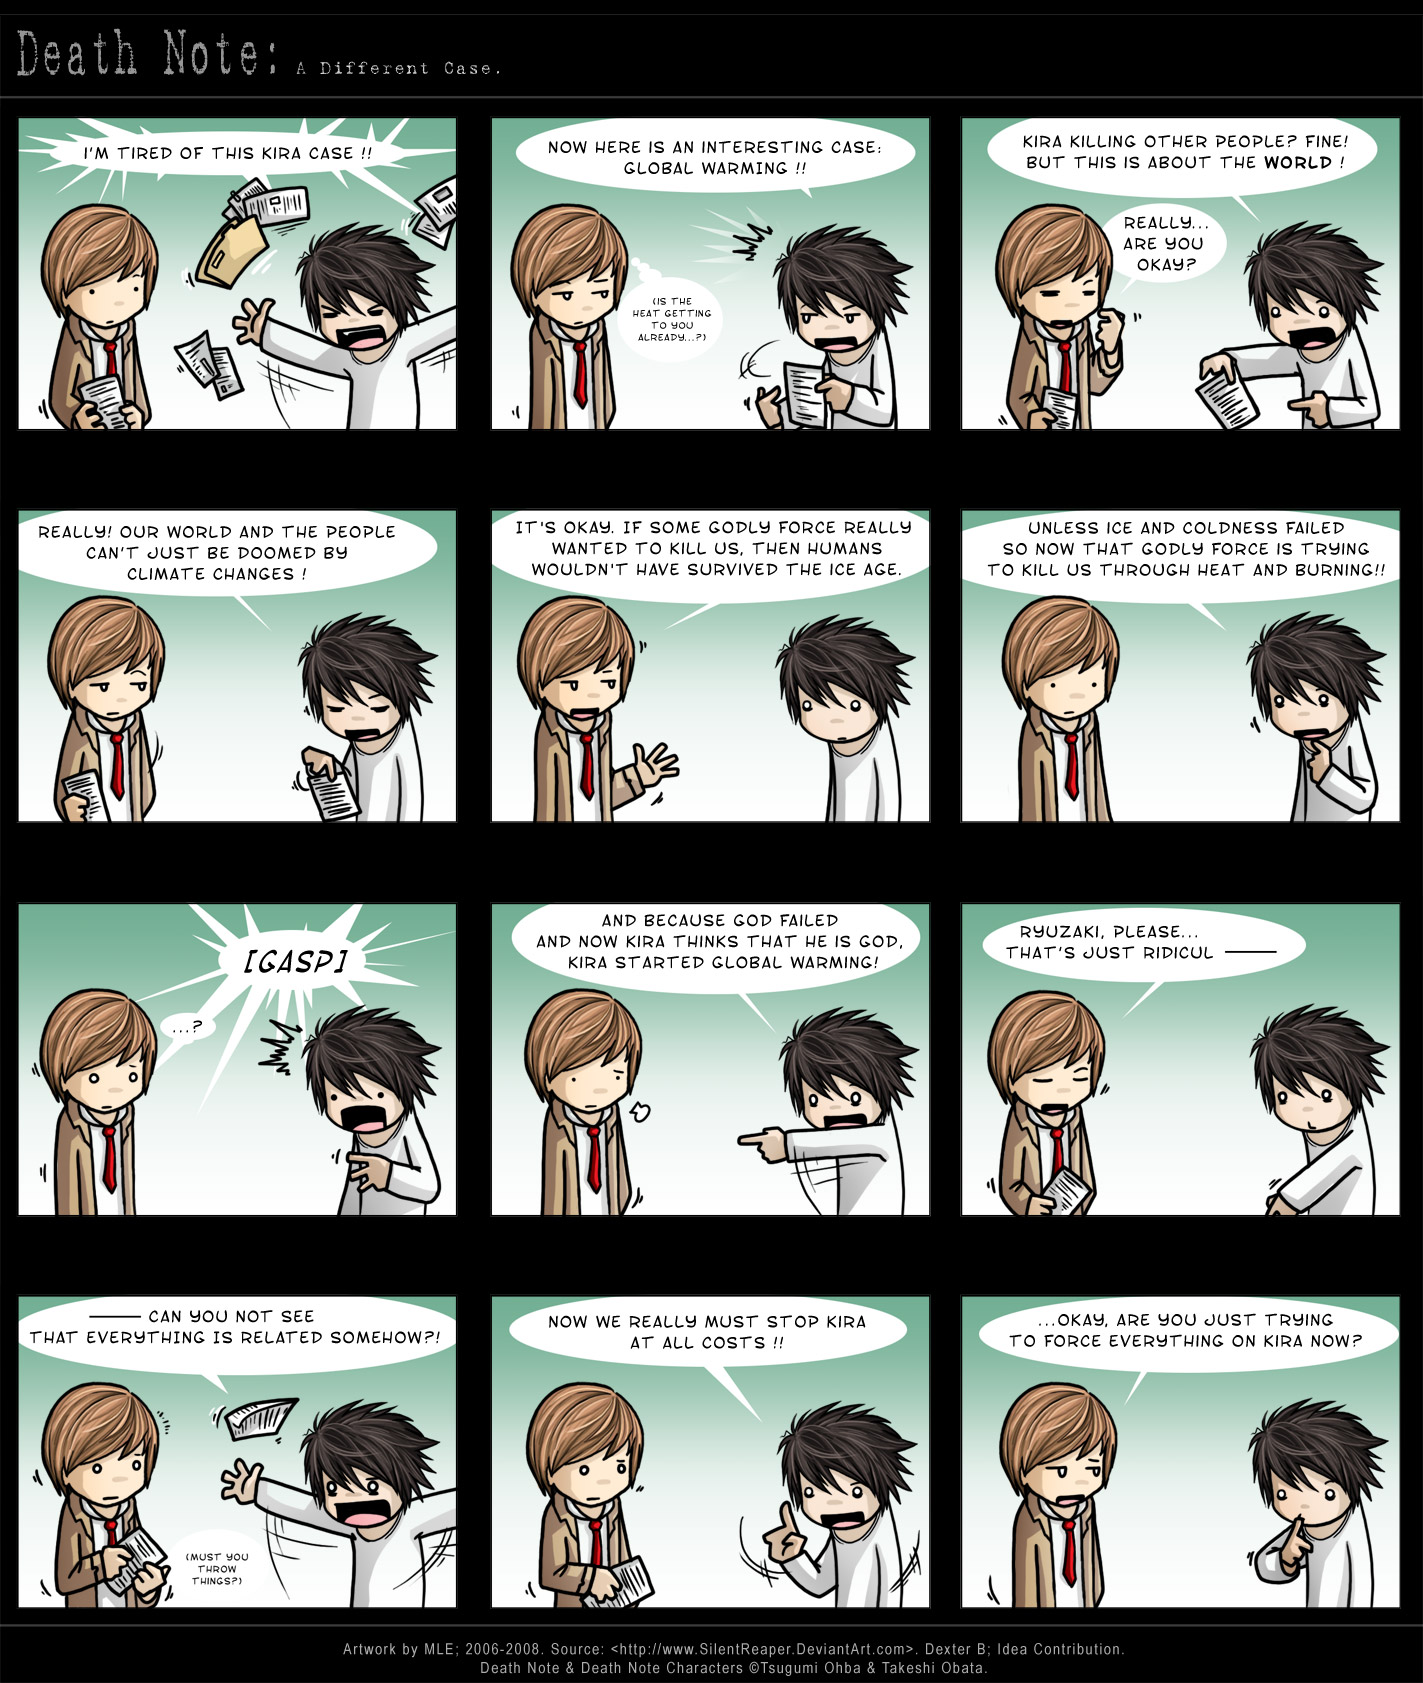 Death_Note__A_Different_Case__by_SilentReaper.jpg